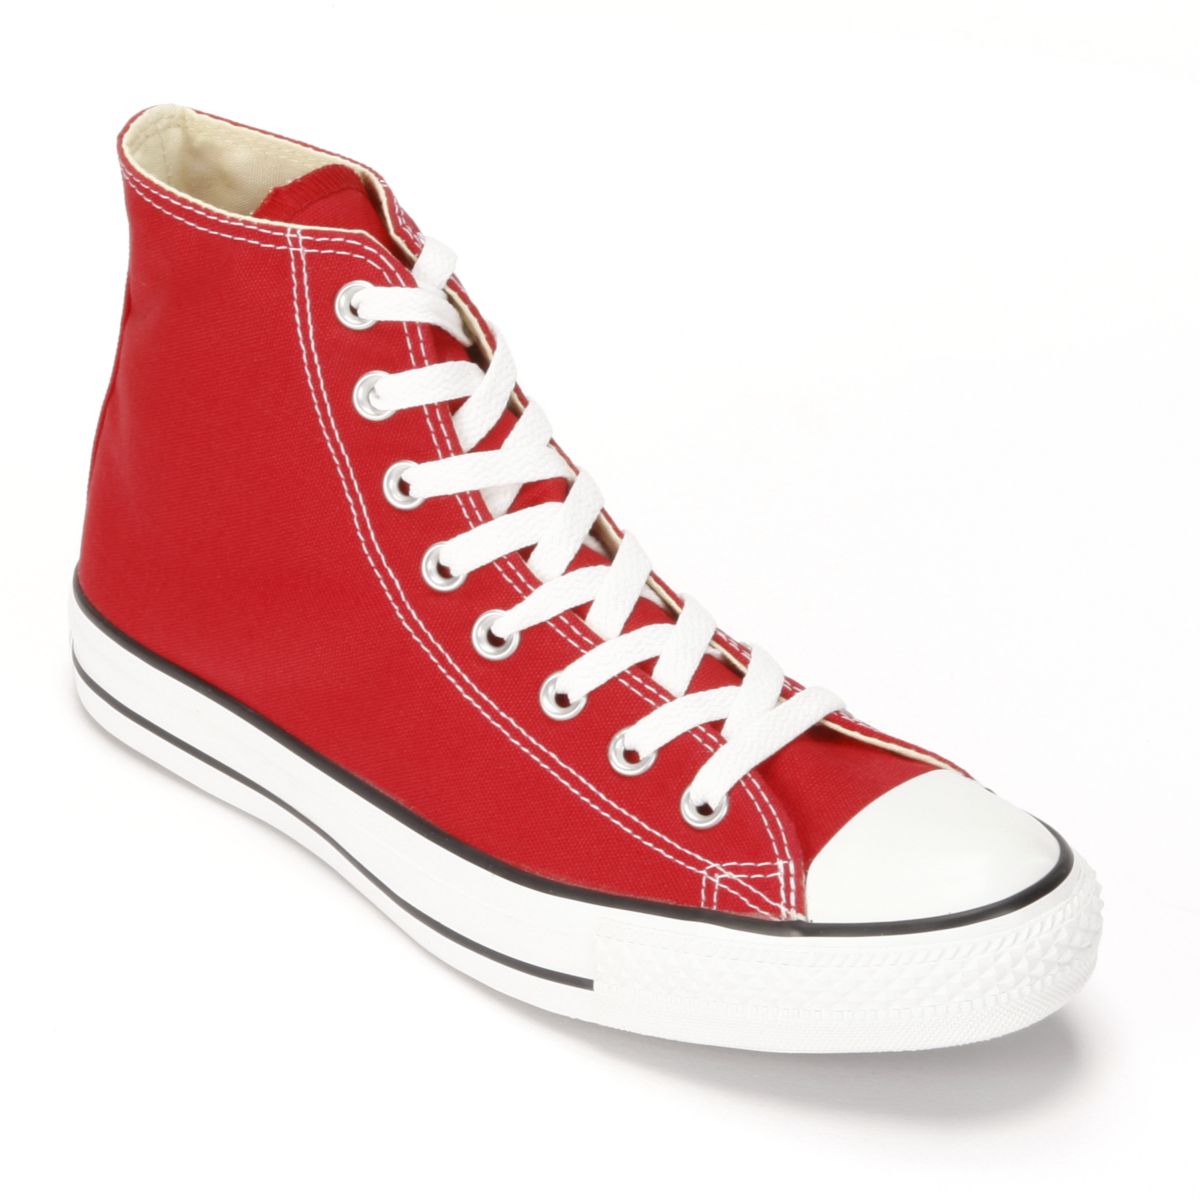 Adult Converse All Star Chuck Taylor High-Top Sneakers Converse